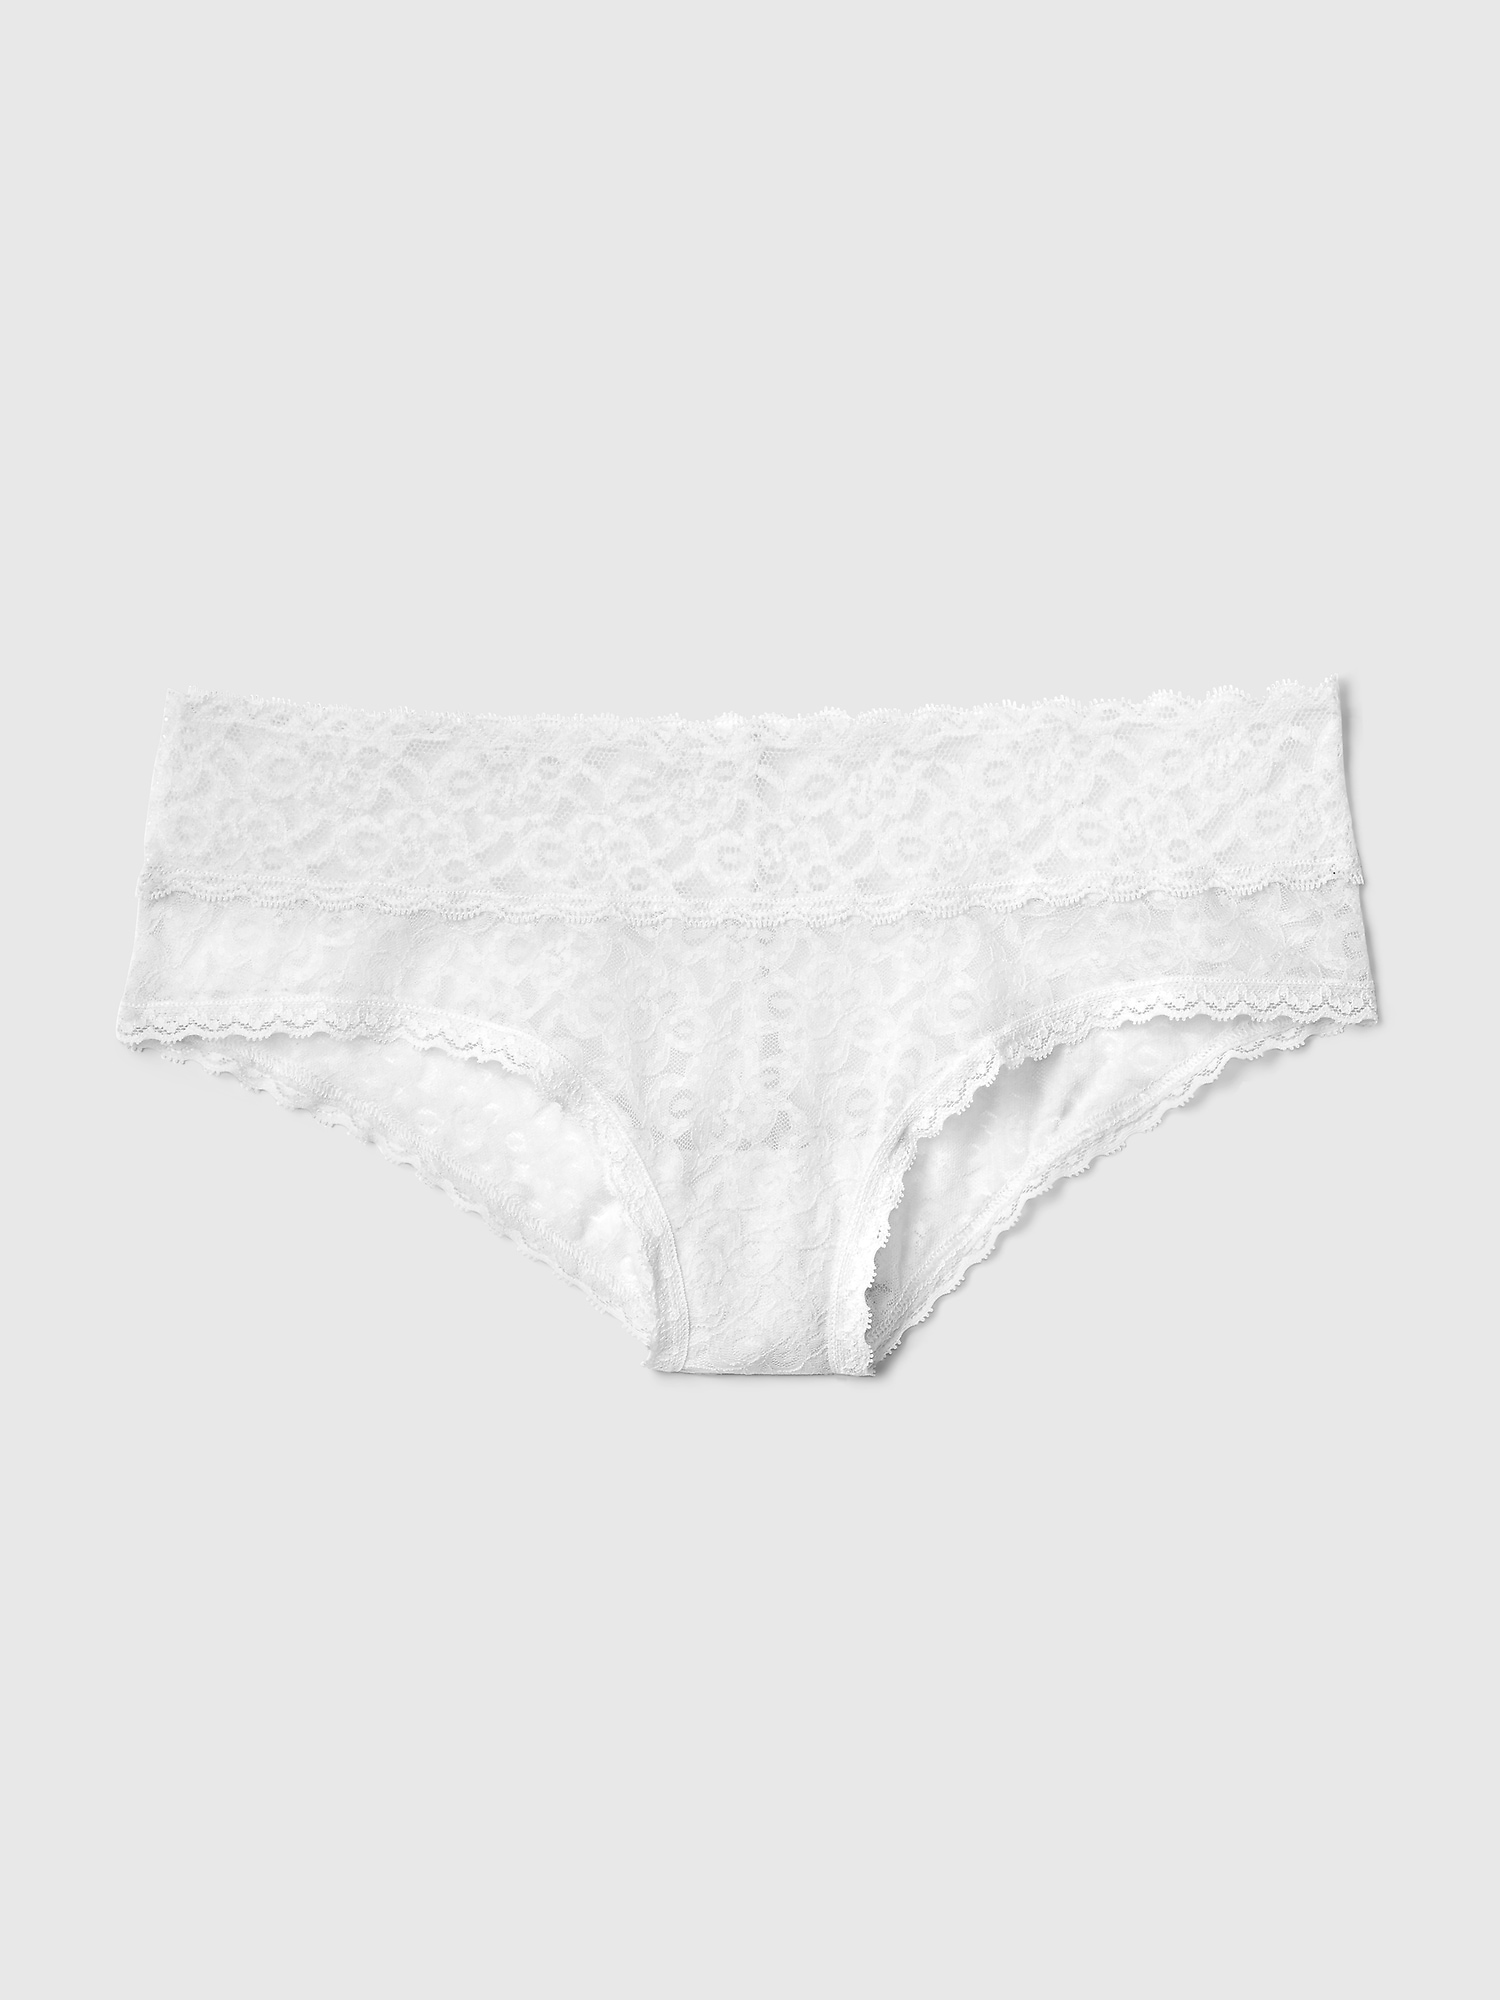 Lowrise Lacy Pink Panties by Delicates - Size Large / 7